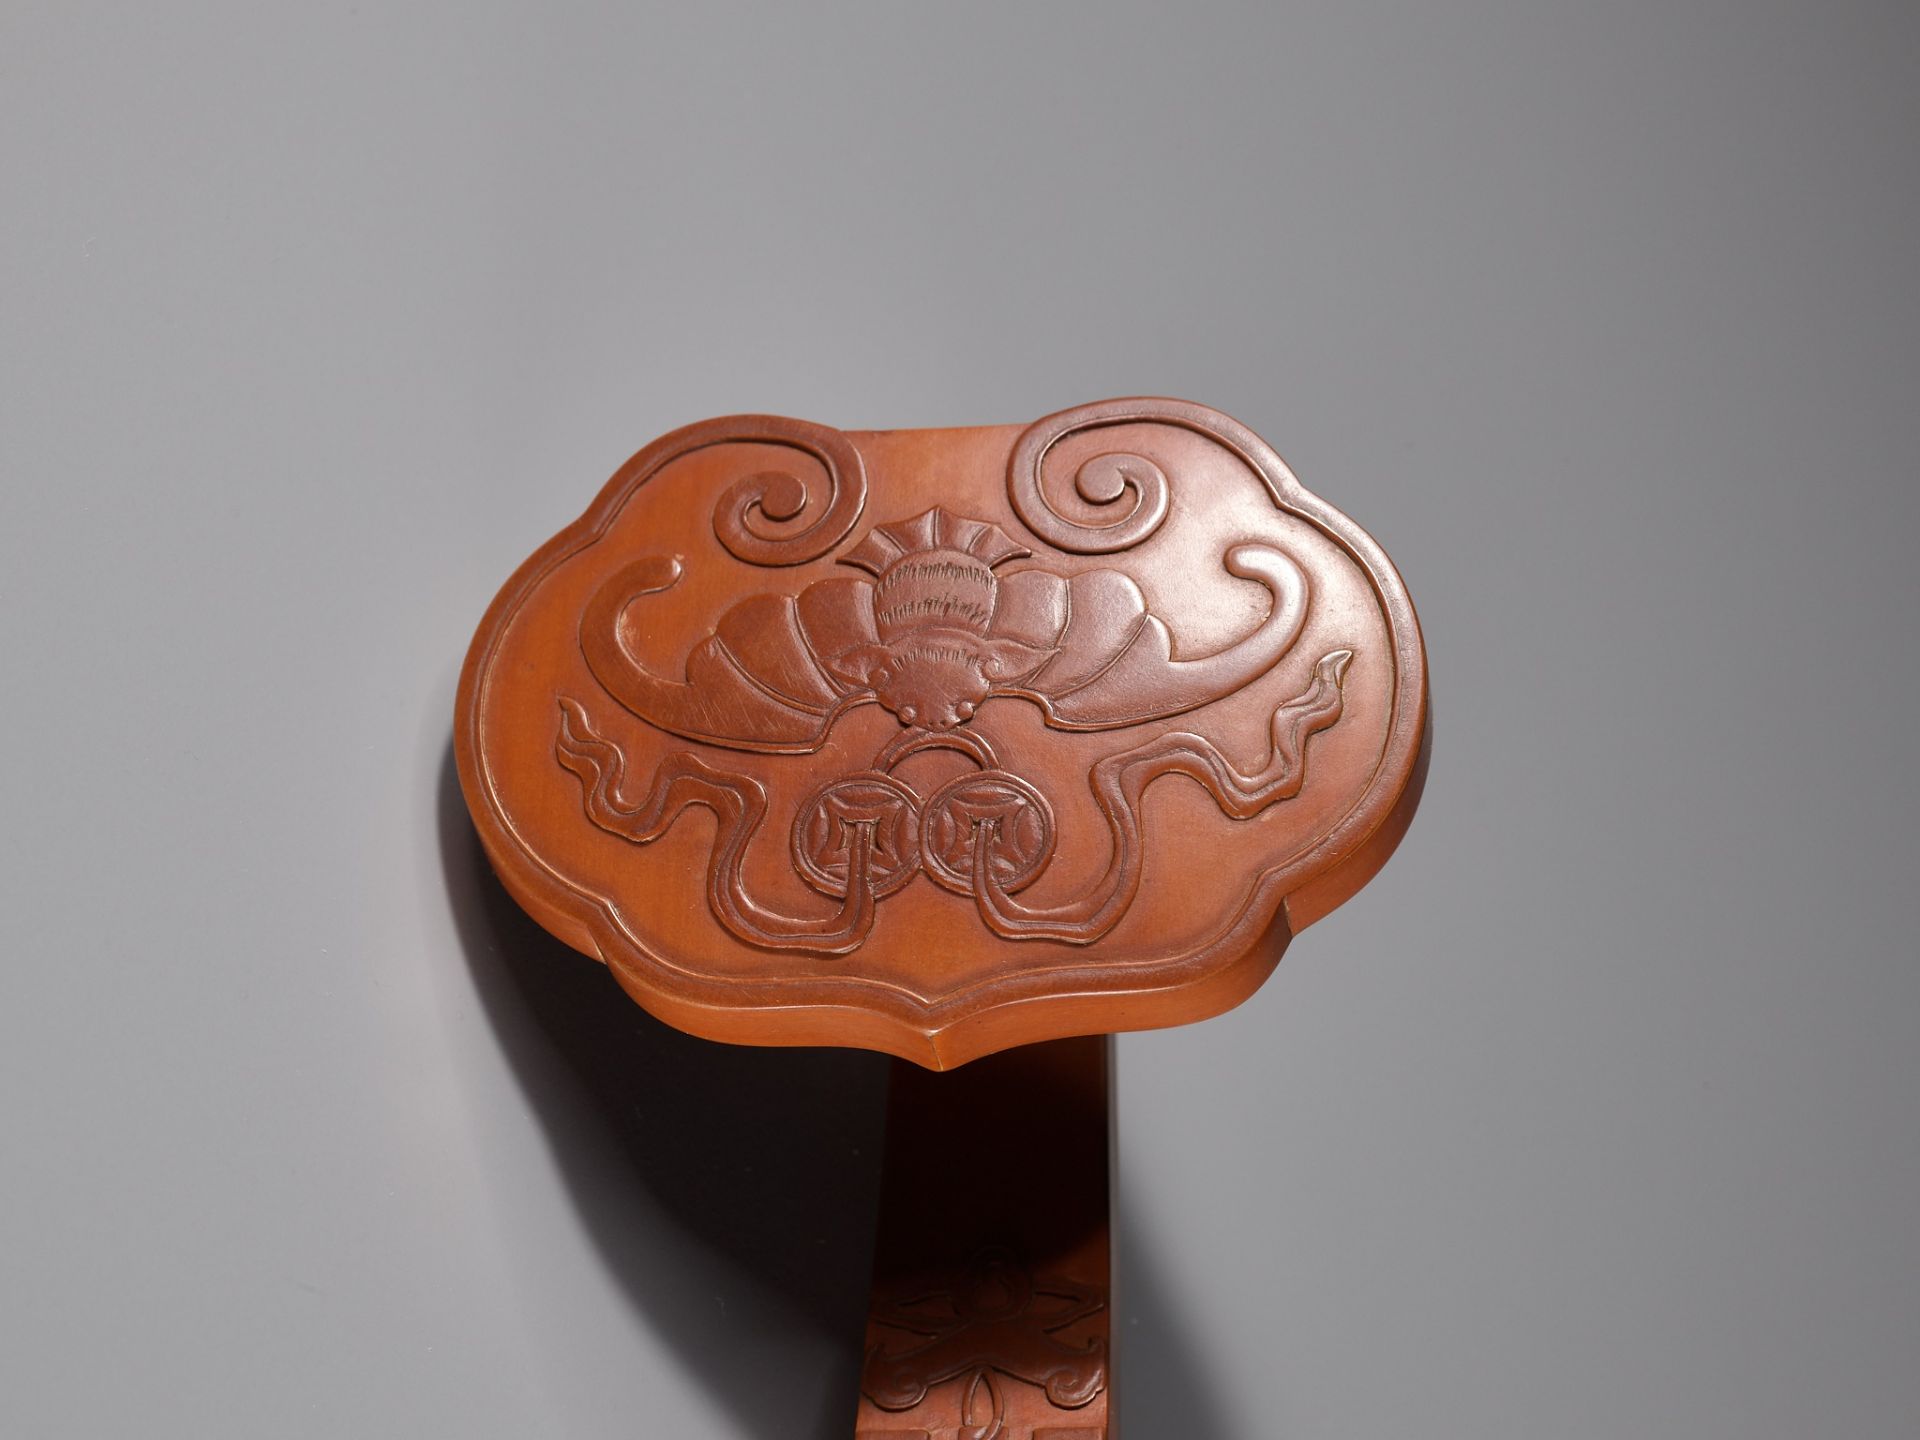 A RARE BAMBOO-VENEER RUYI SCEPTRE, QIANLONG PERIOD, IMPERIALLY INSCRIBED WITH A POEM - Image 9 of 15